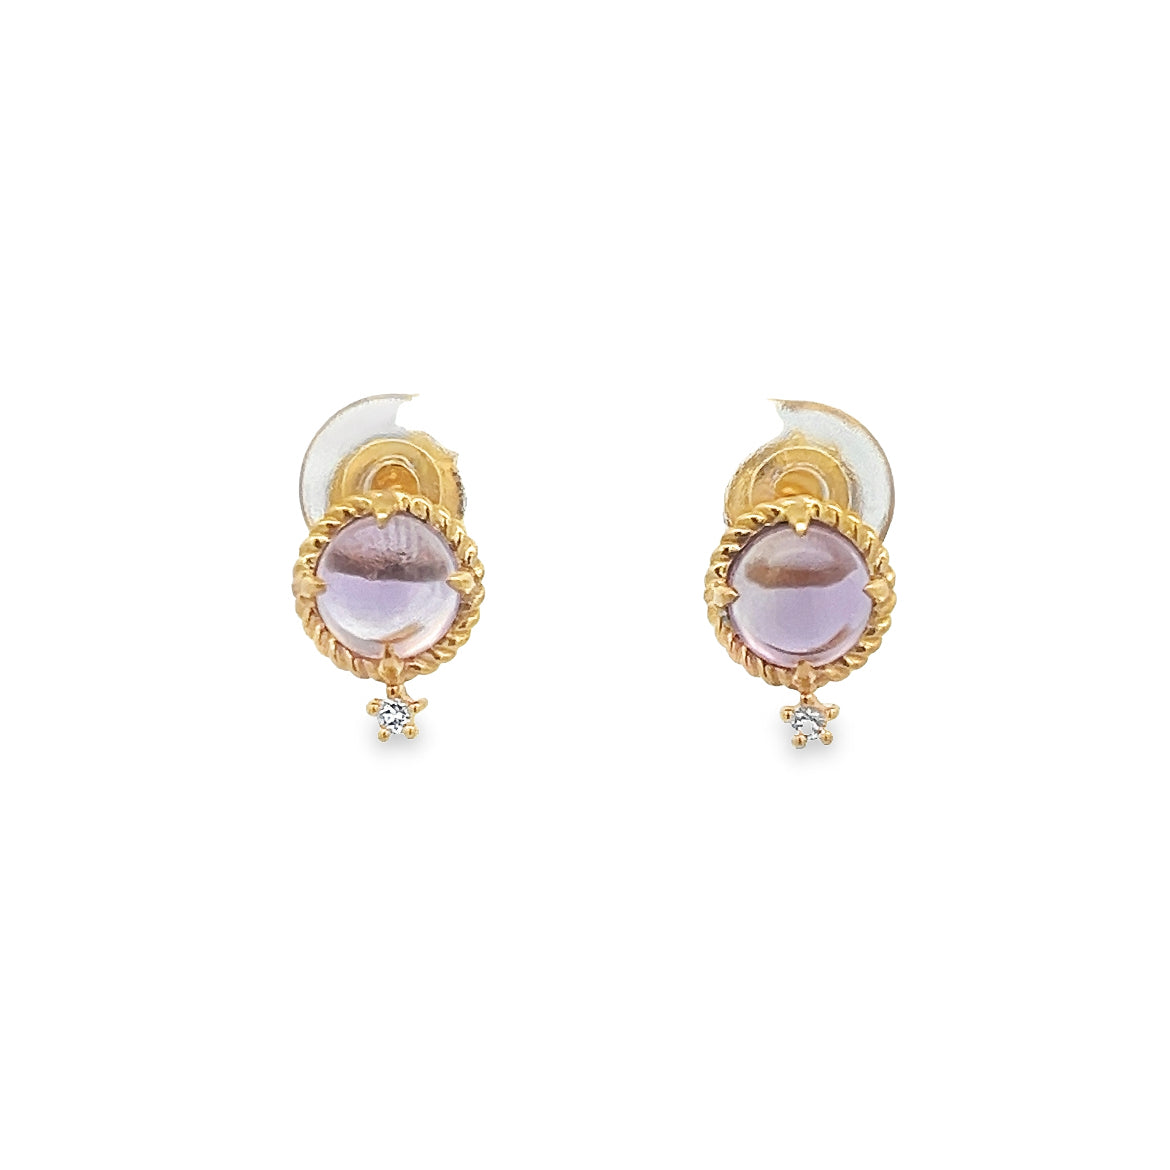 925 SILVER GOLD PLATED EARRINGS WITH AMETHYST AND WHITE TOPAZ